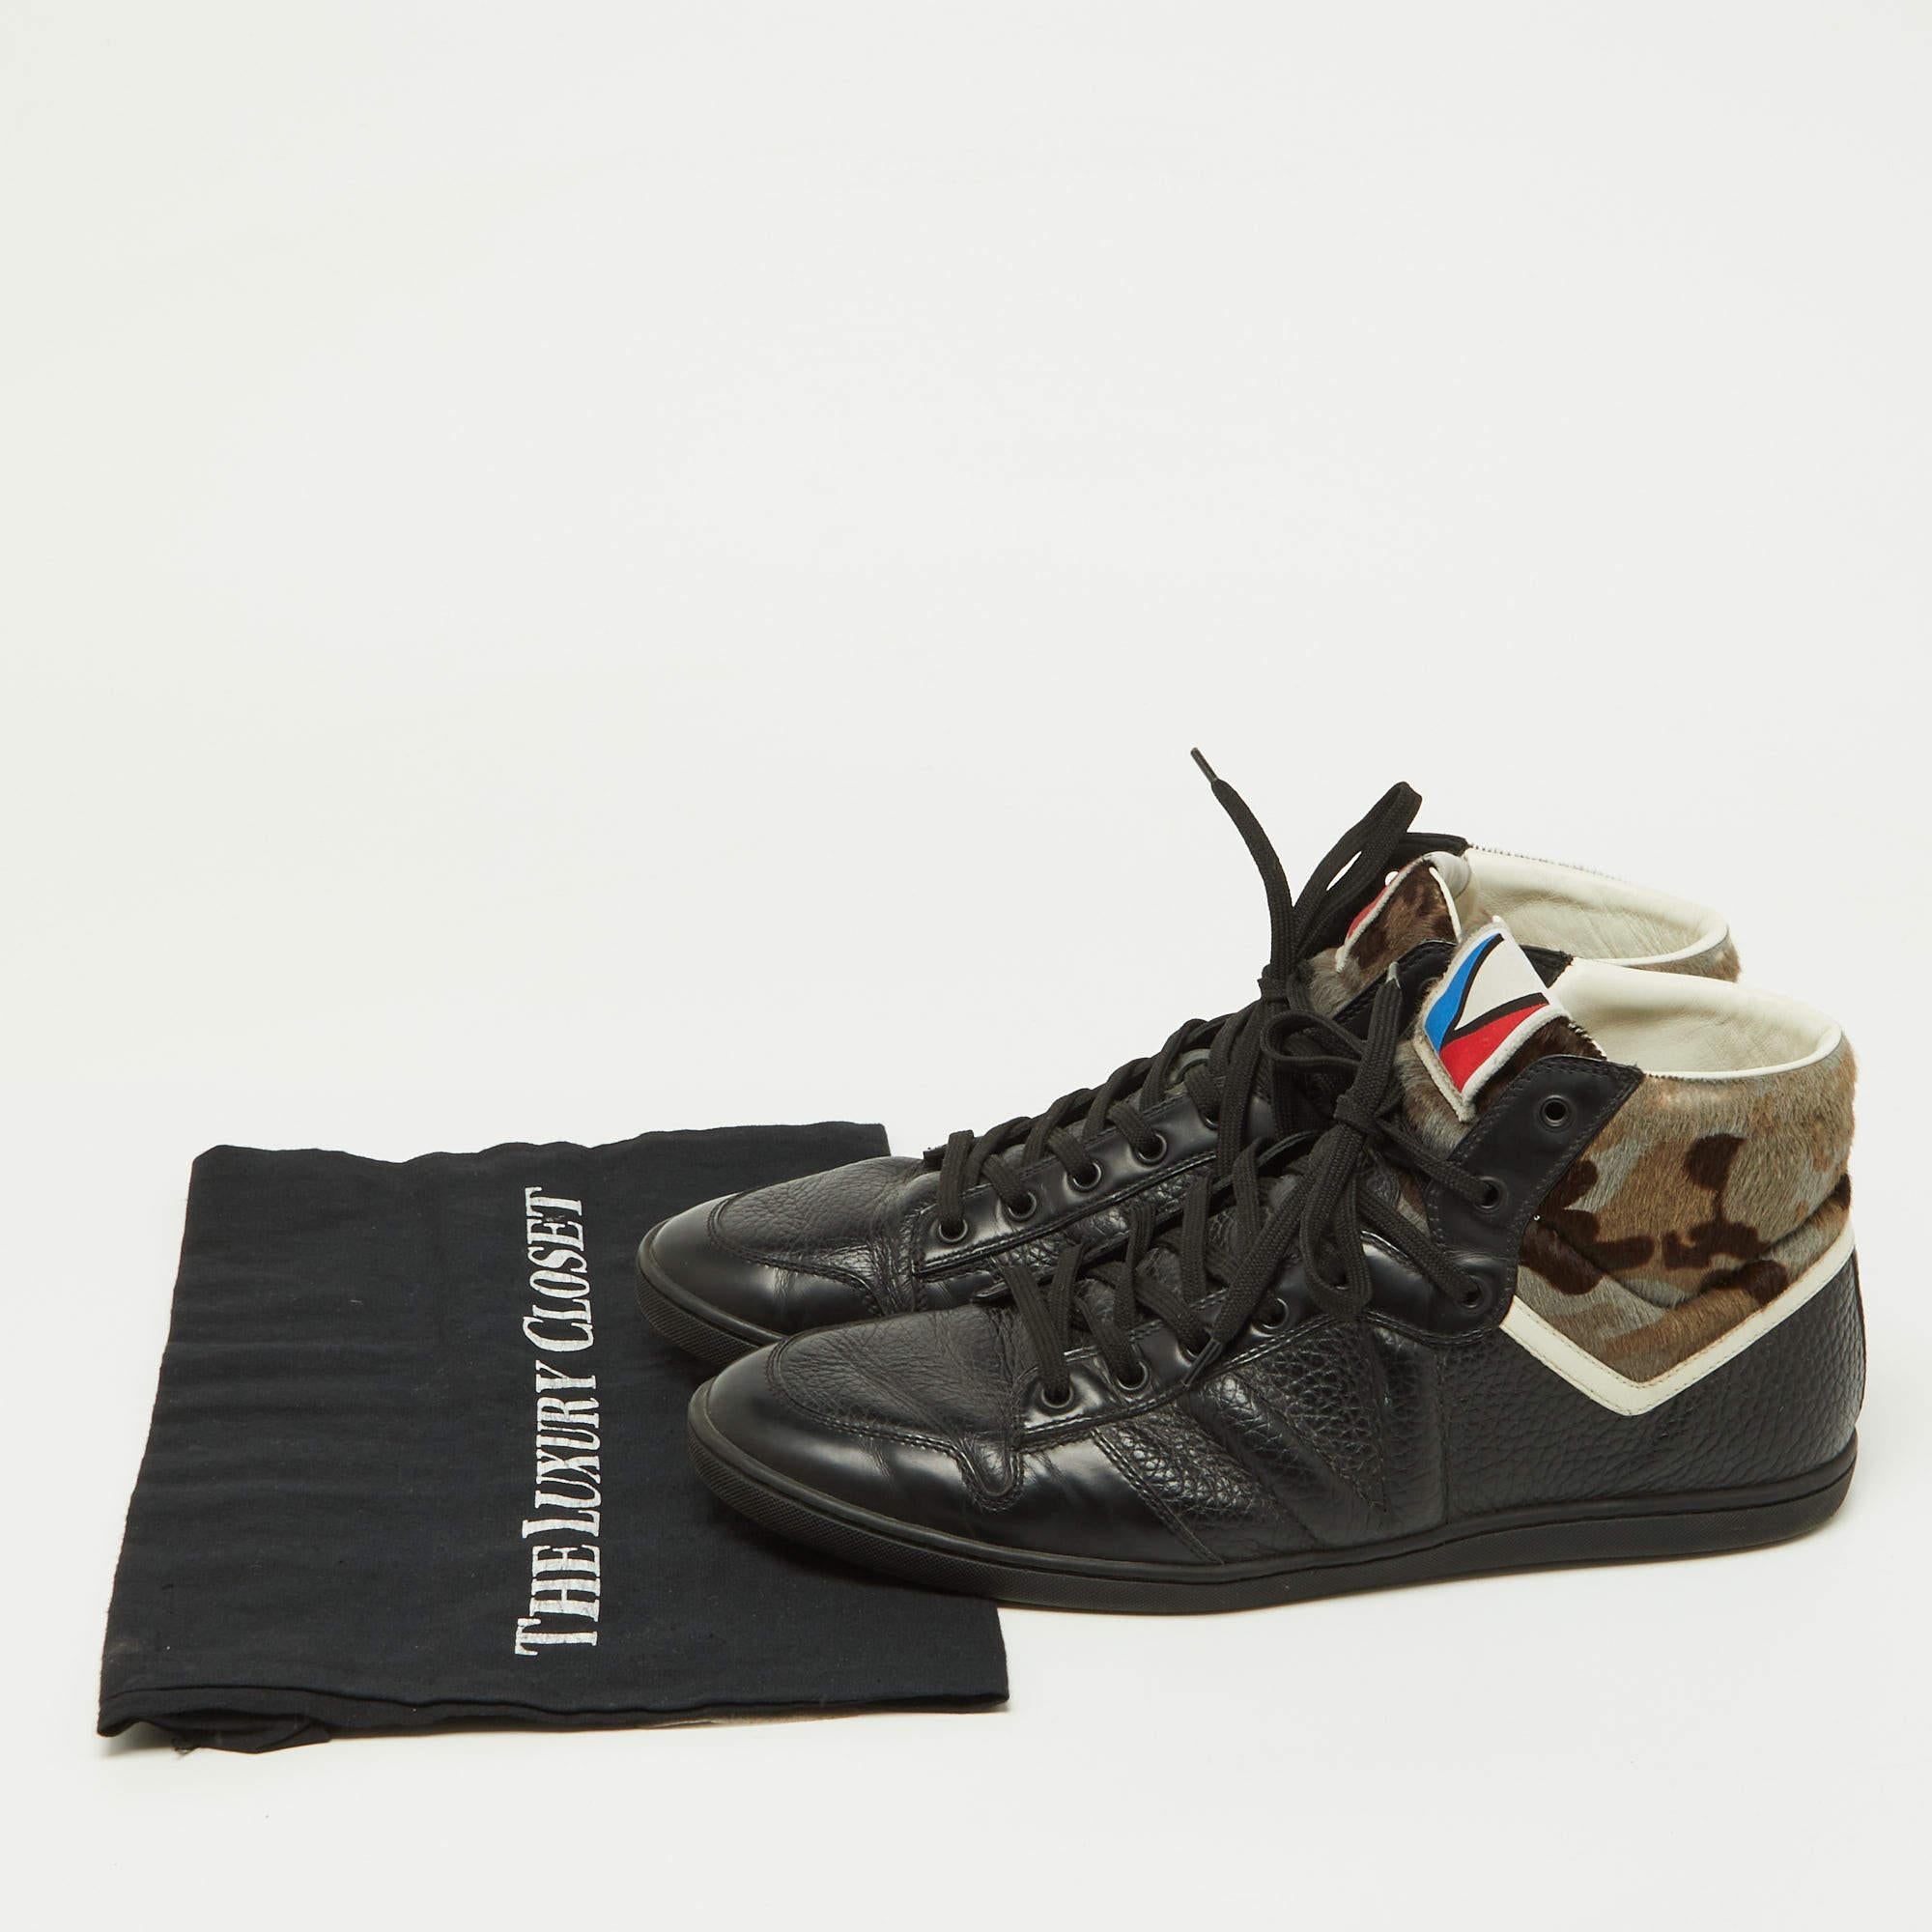 Louis Vuitton Black Leather and Calfhair Trainer High Top Sneakers Size 43 For Sale 5